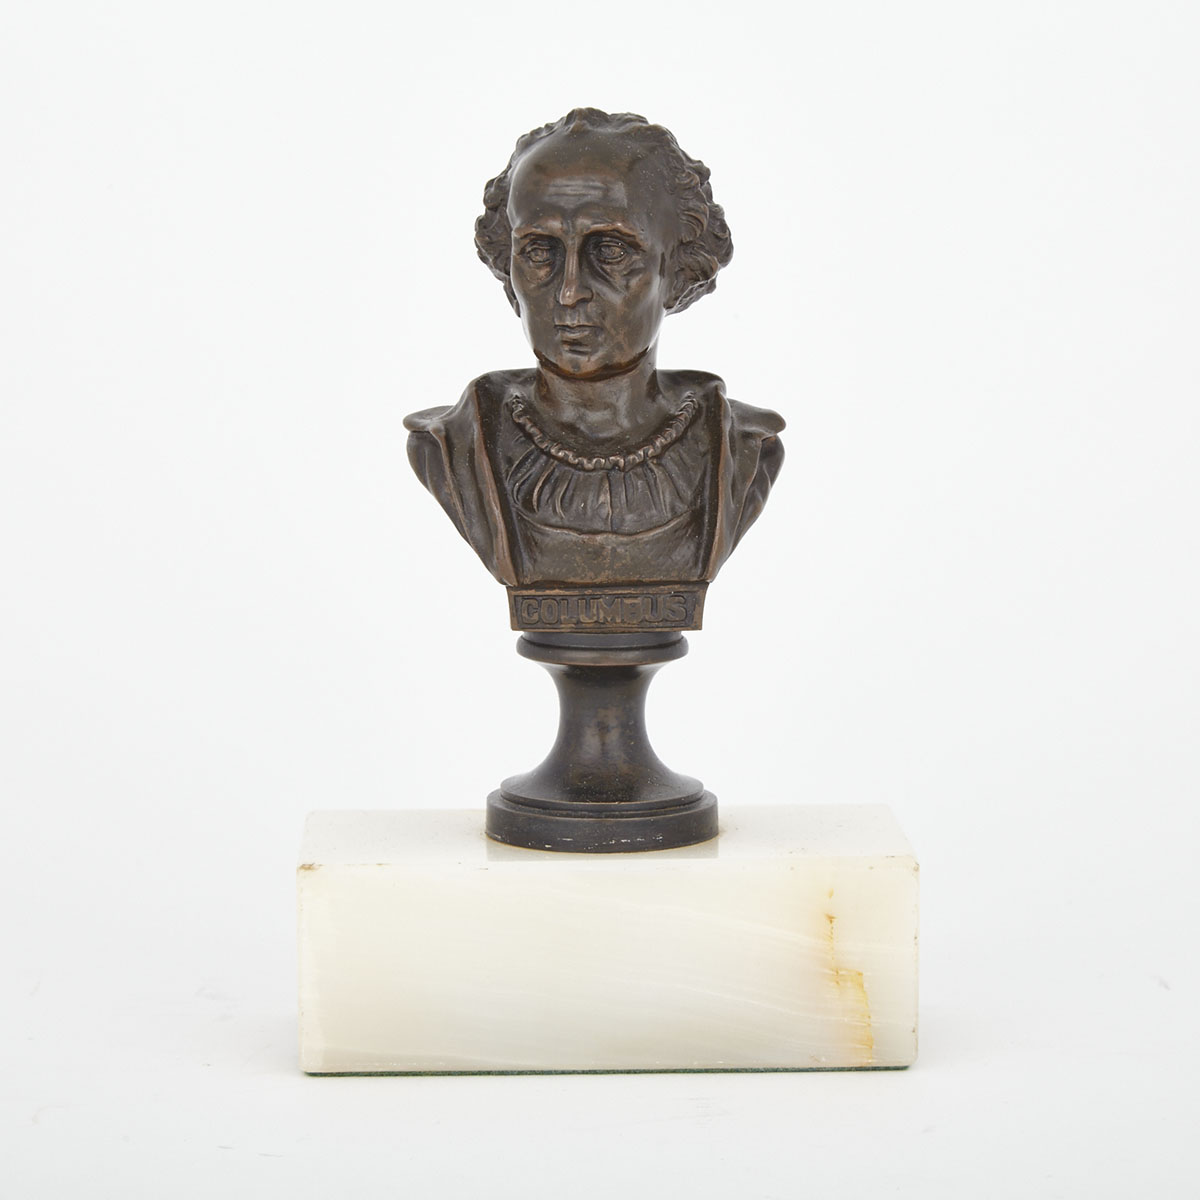 Small Patinated Bronze Bust of Christopher Columbus, early 20th century